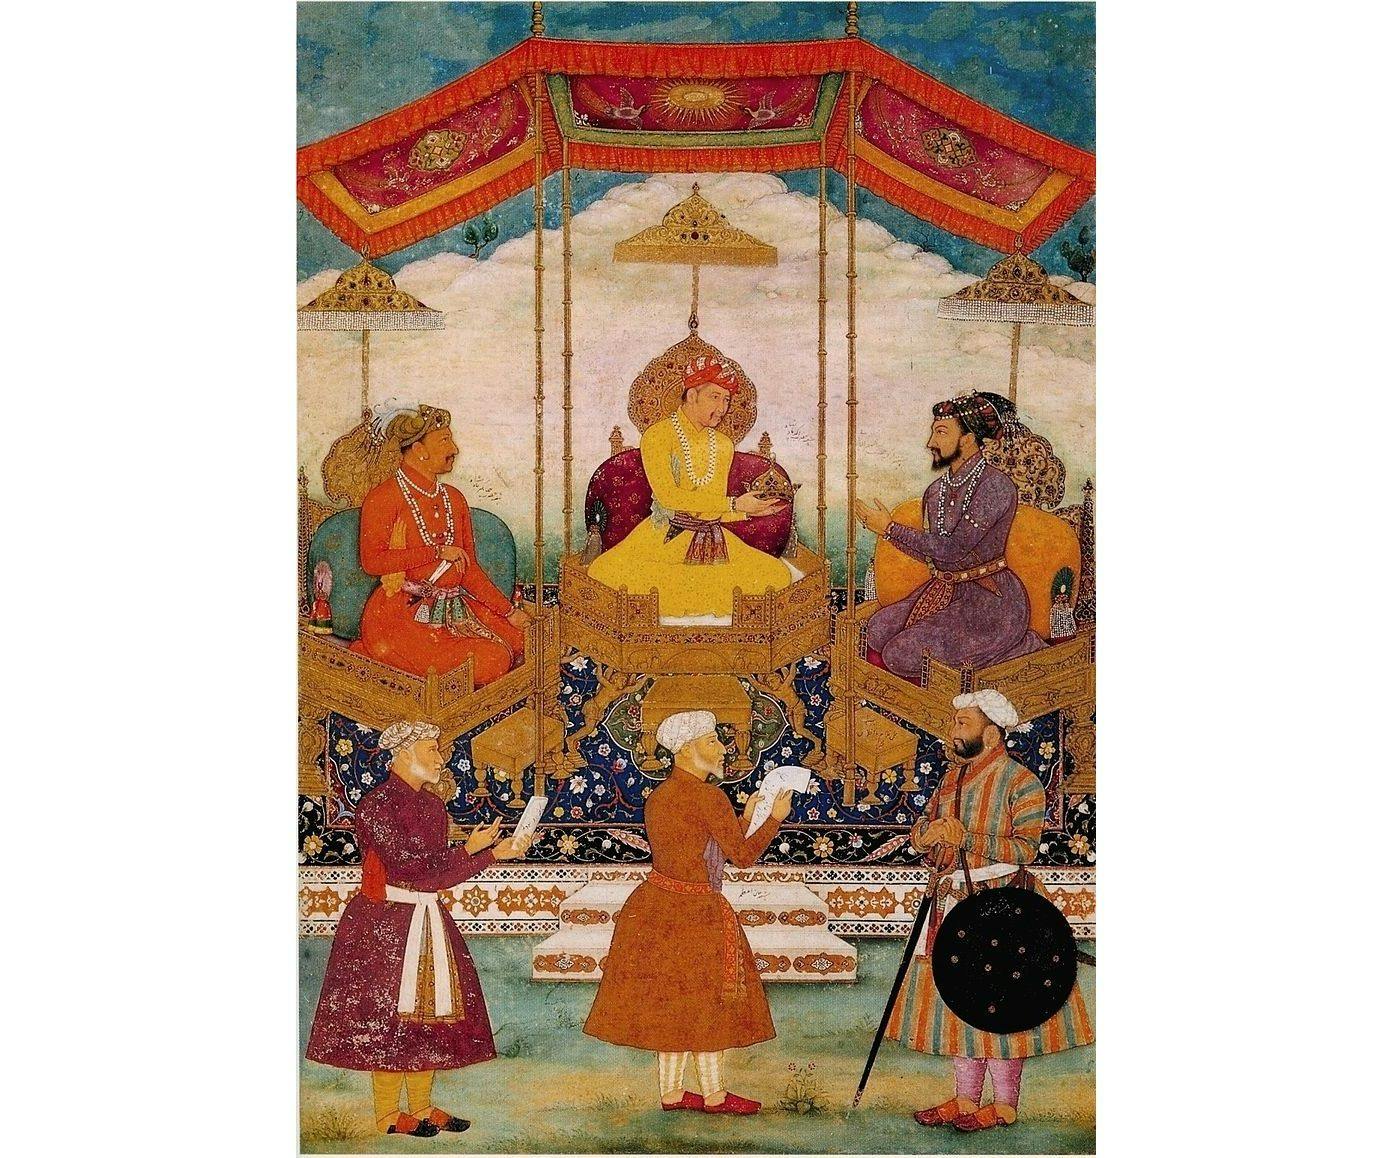 Akbar hands over his crown to Shah Jahan as Jahangir (left) looks on